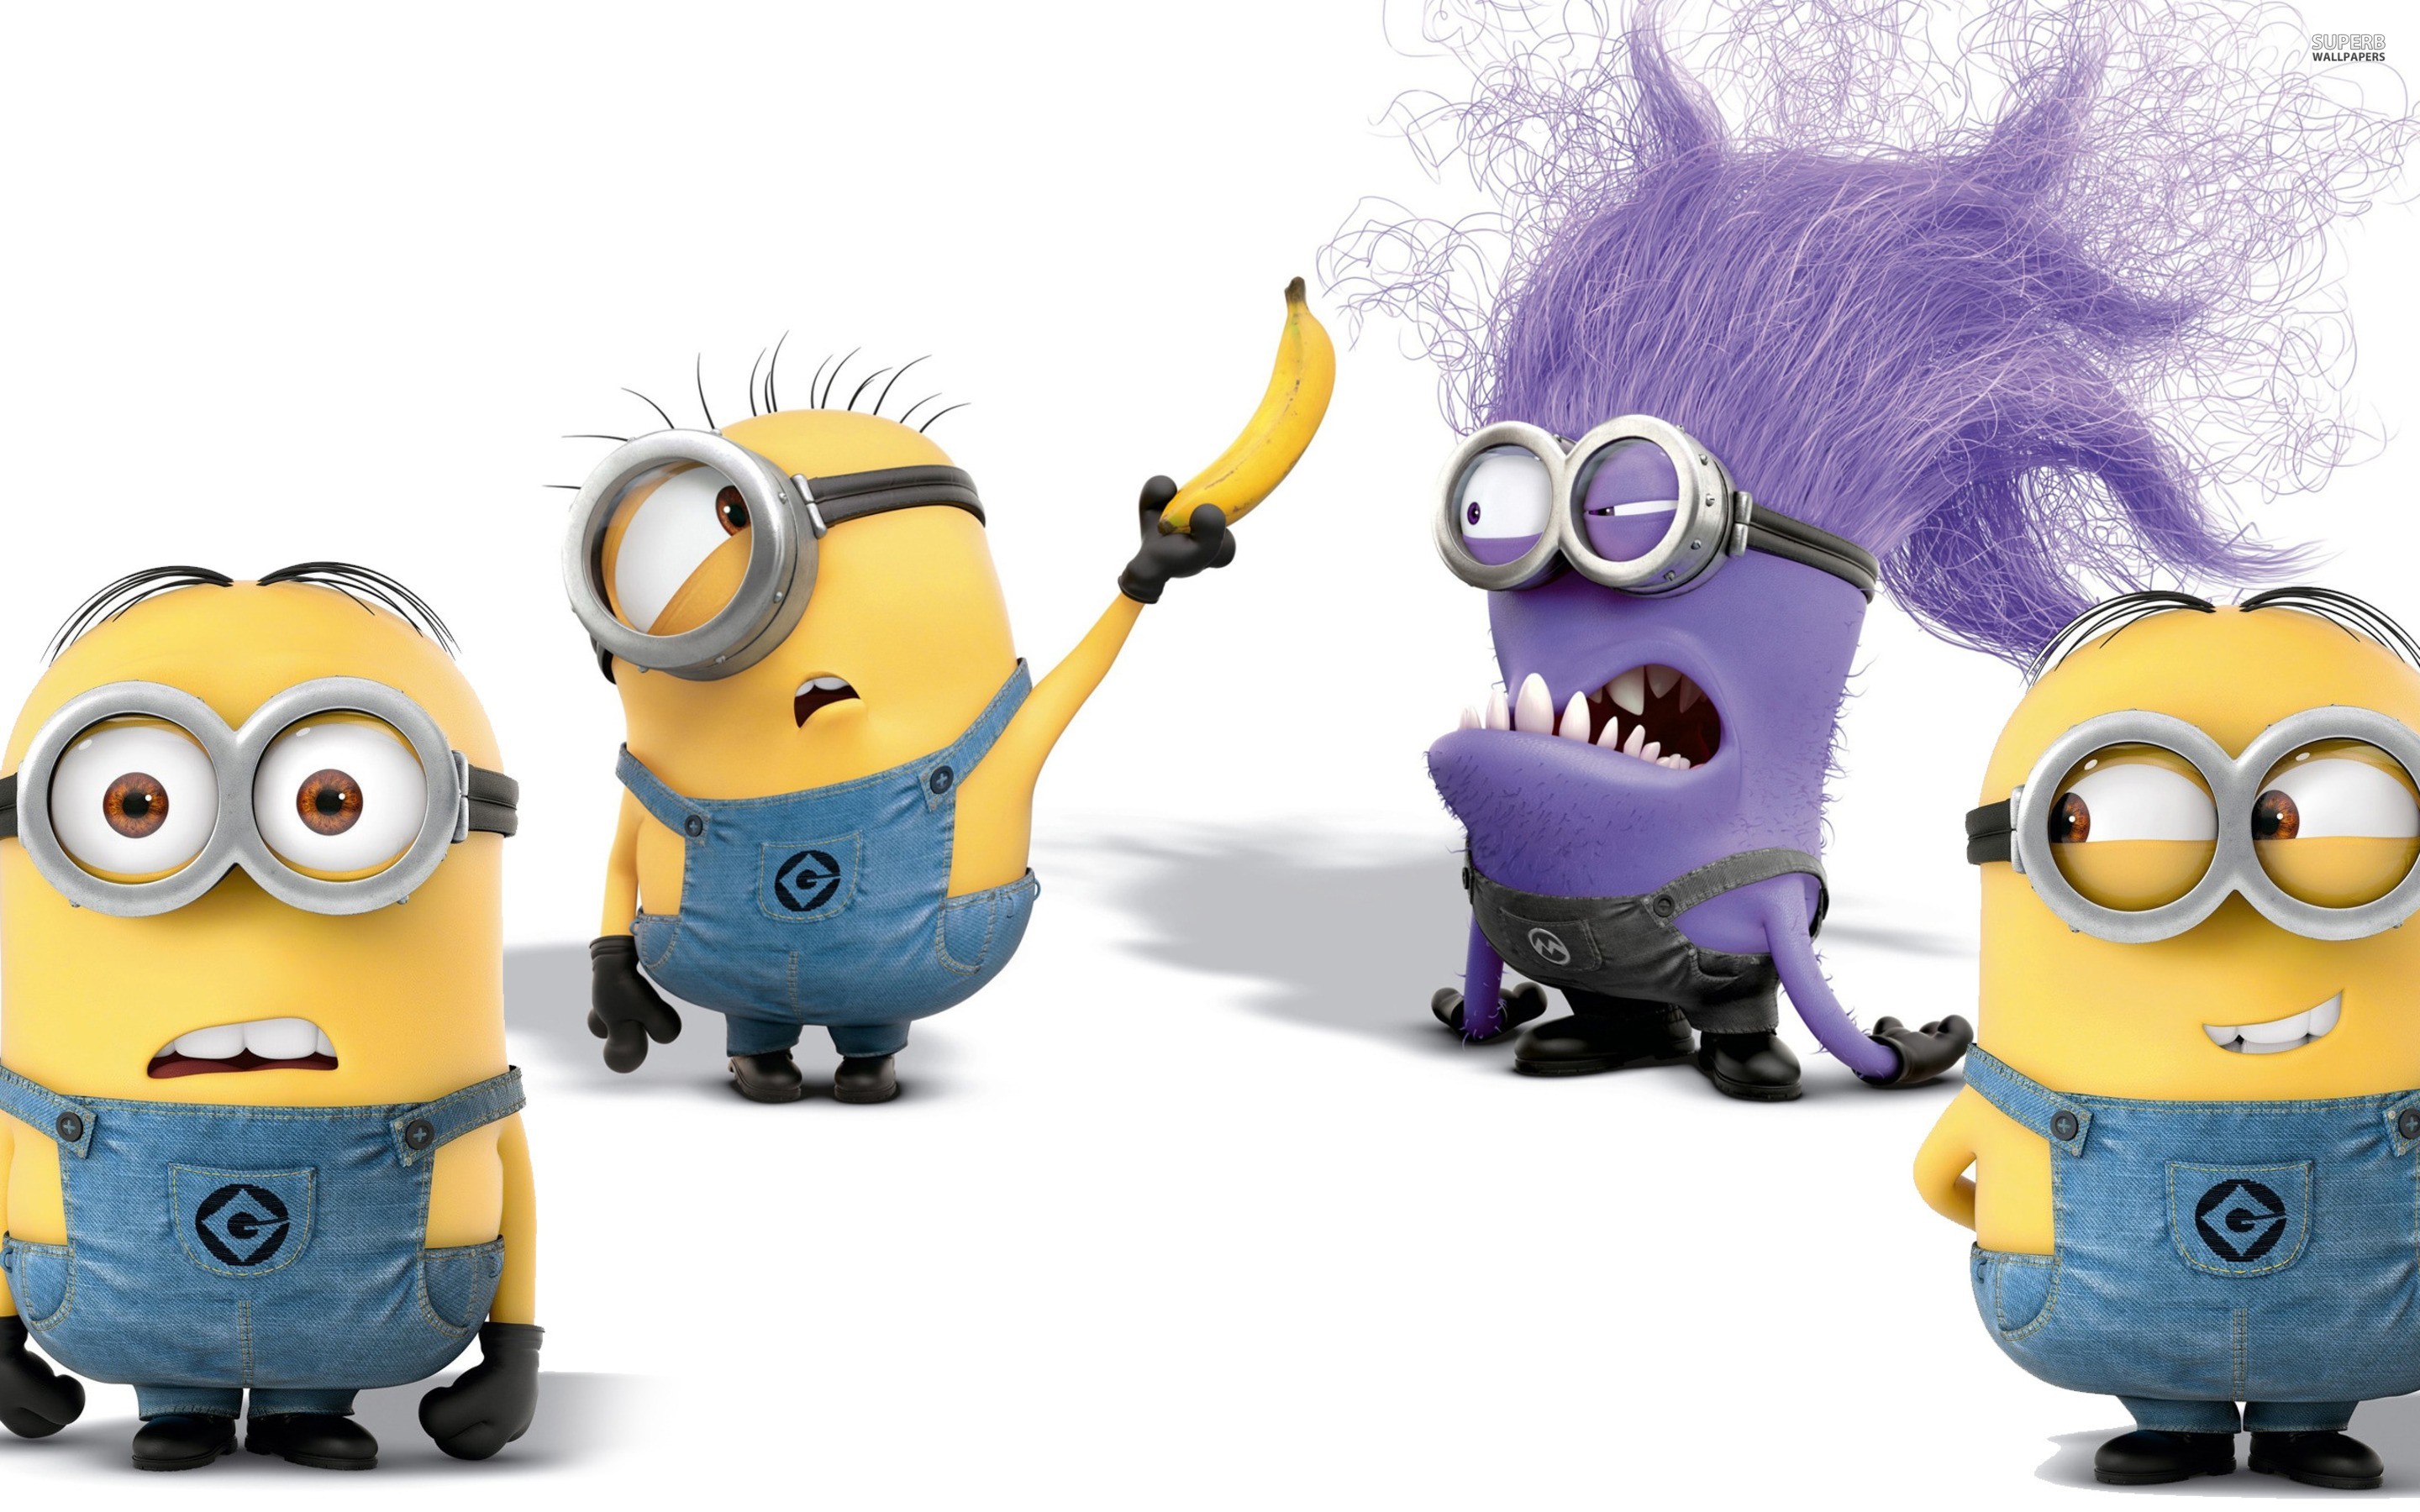 General 2880x1800 Despicable Me minions animated movies movies movie characters Universal Pictures